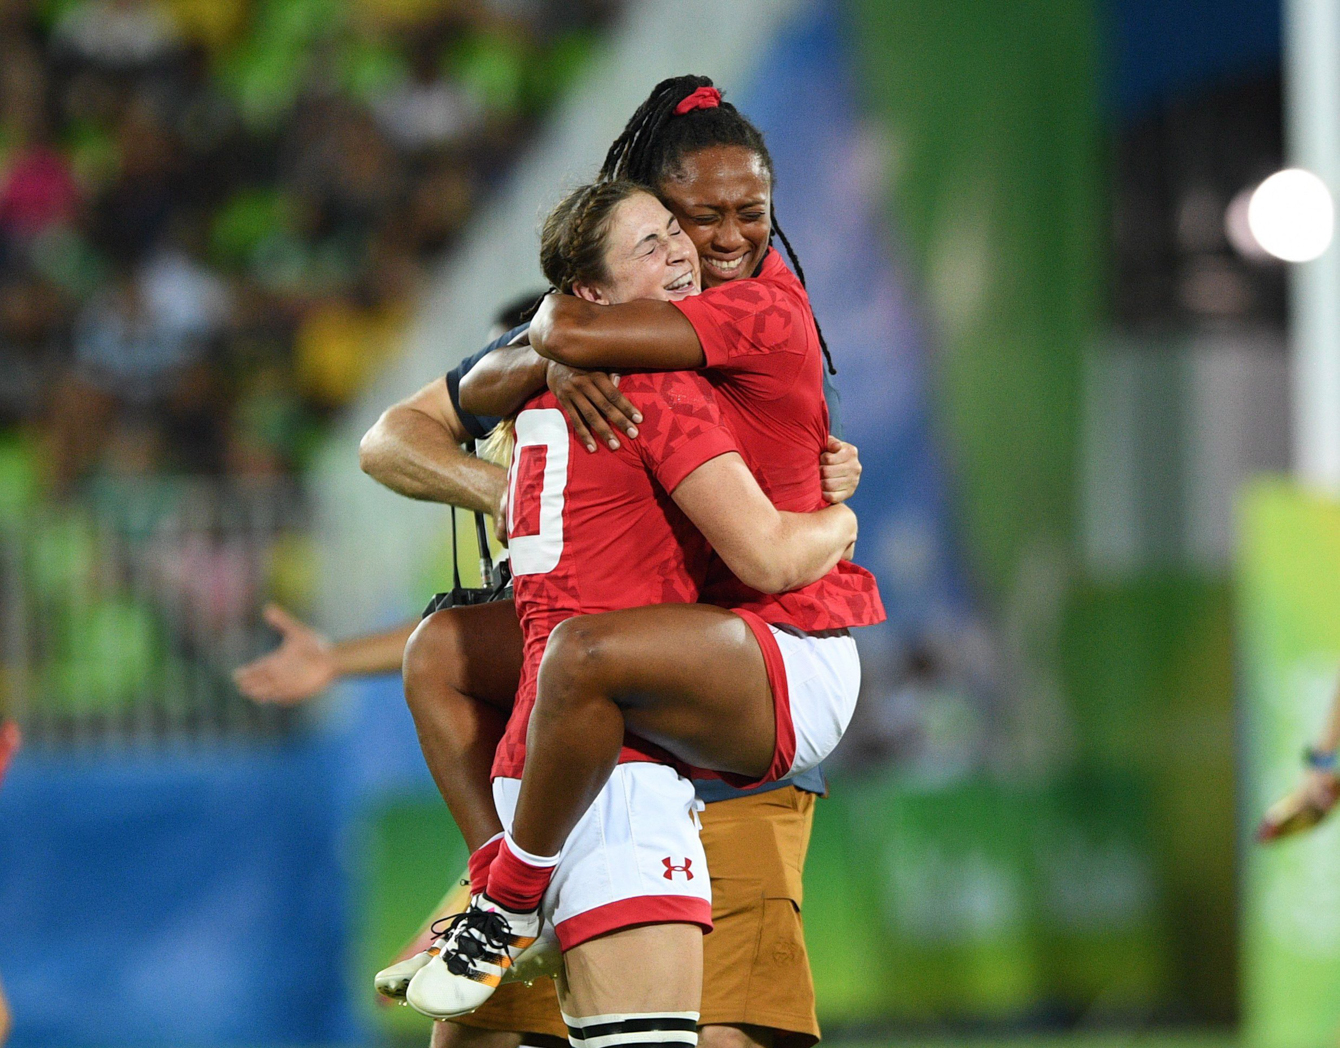 Canada's Charity Williams, right, jumps into the arms of Hannah Darling as they win bronze defeating Great Britain's in women's rugby sevens at the 2016 Olympic Summer Games in Rio de Janeiro, Brazil on Monday, Aug. 8, 2016. THE CANADIAN PRESS/Sean Kilpatrick